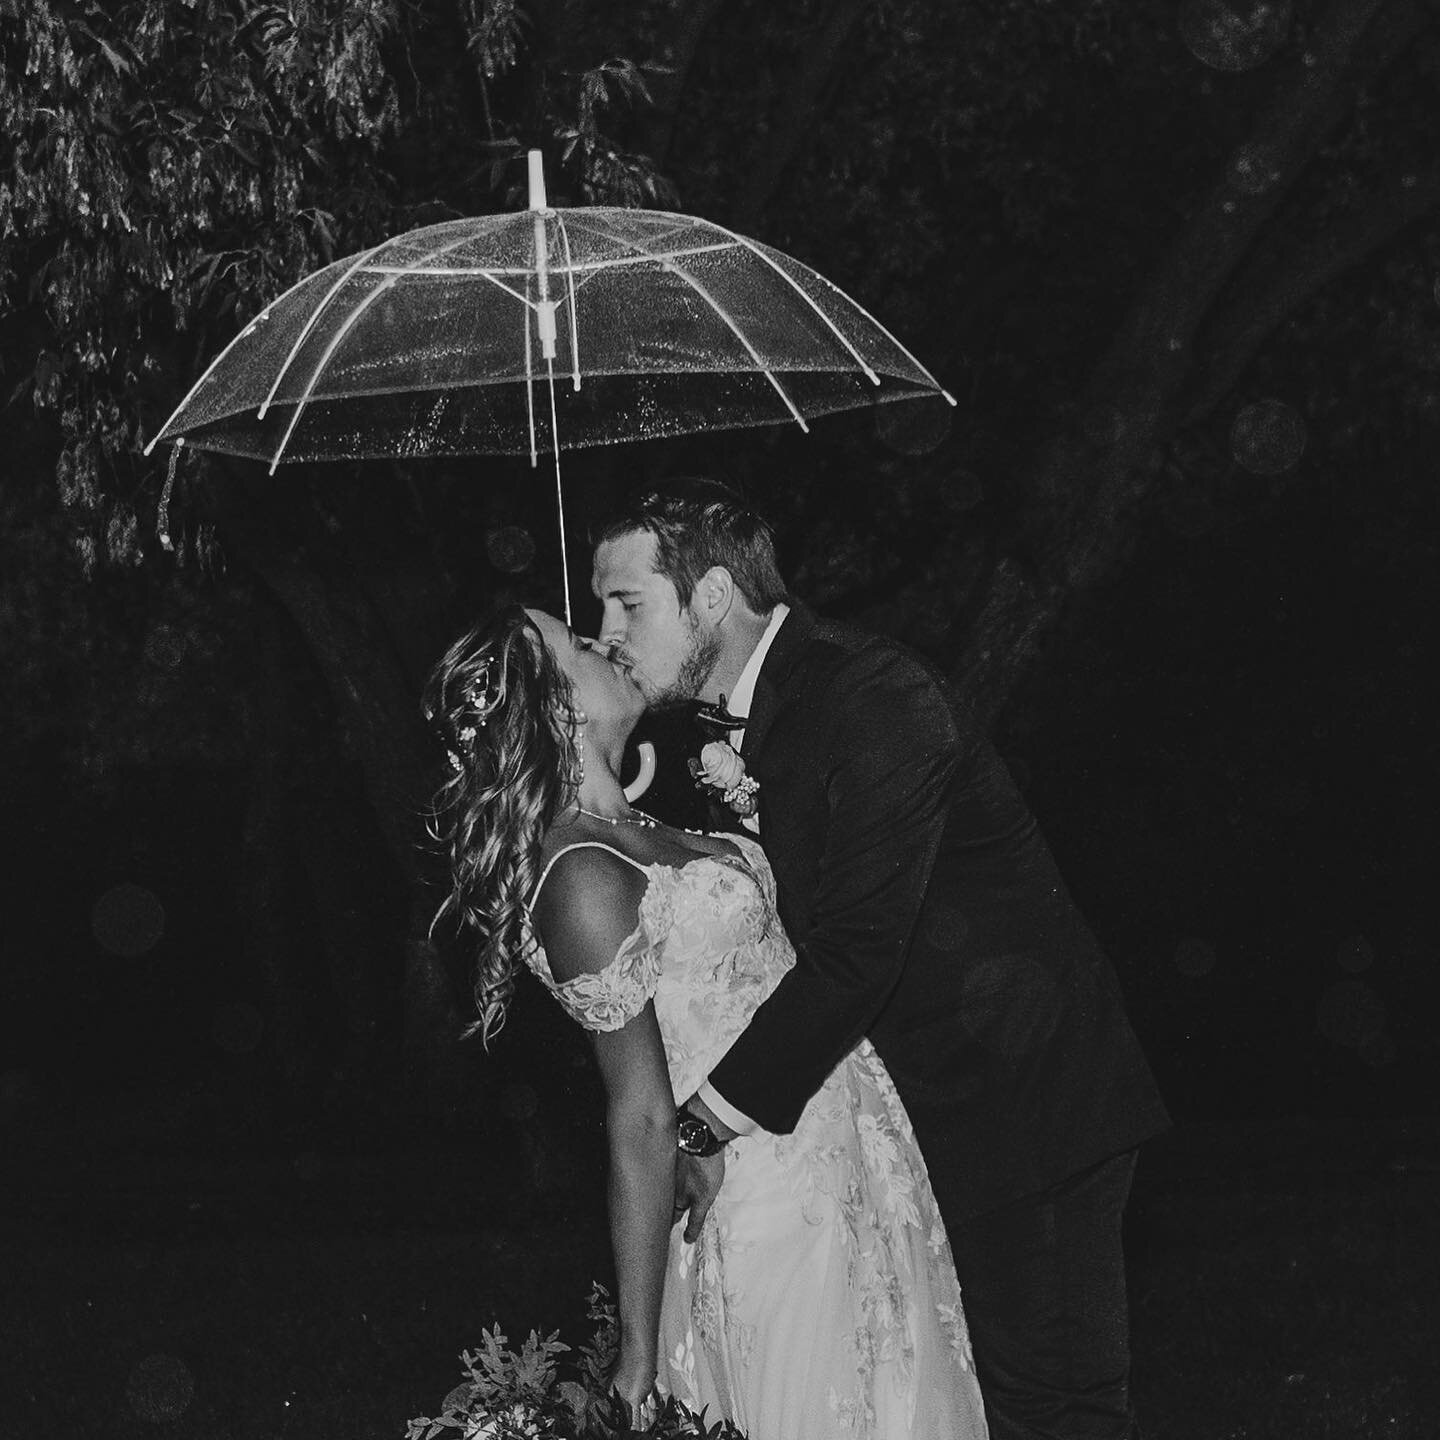 ✏ New on the Blog - 5 Secrets to a Successful Rainy Day Wedding

Worried about April Showers? We&rsquo;re here to let you in on a few secrets to a rainy wedding day! Visit the link in our bio to learn more on how you can prepare yourself and maybe, j